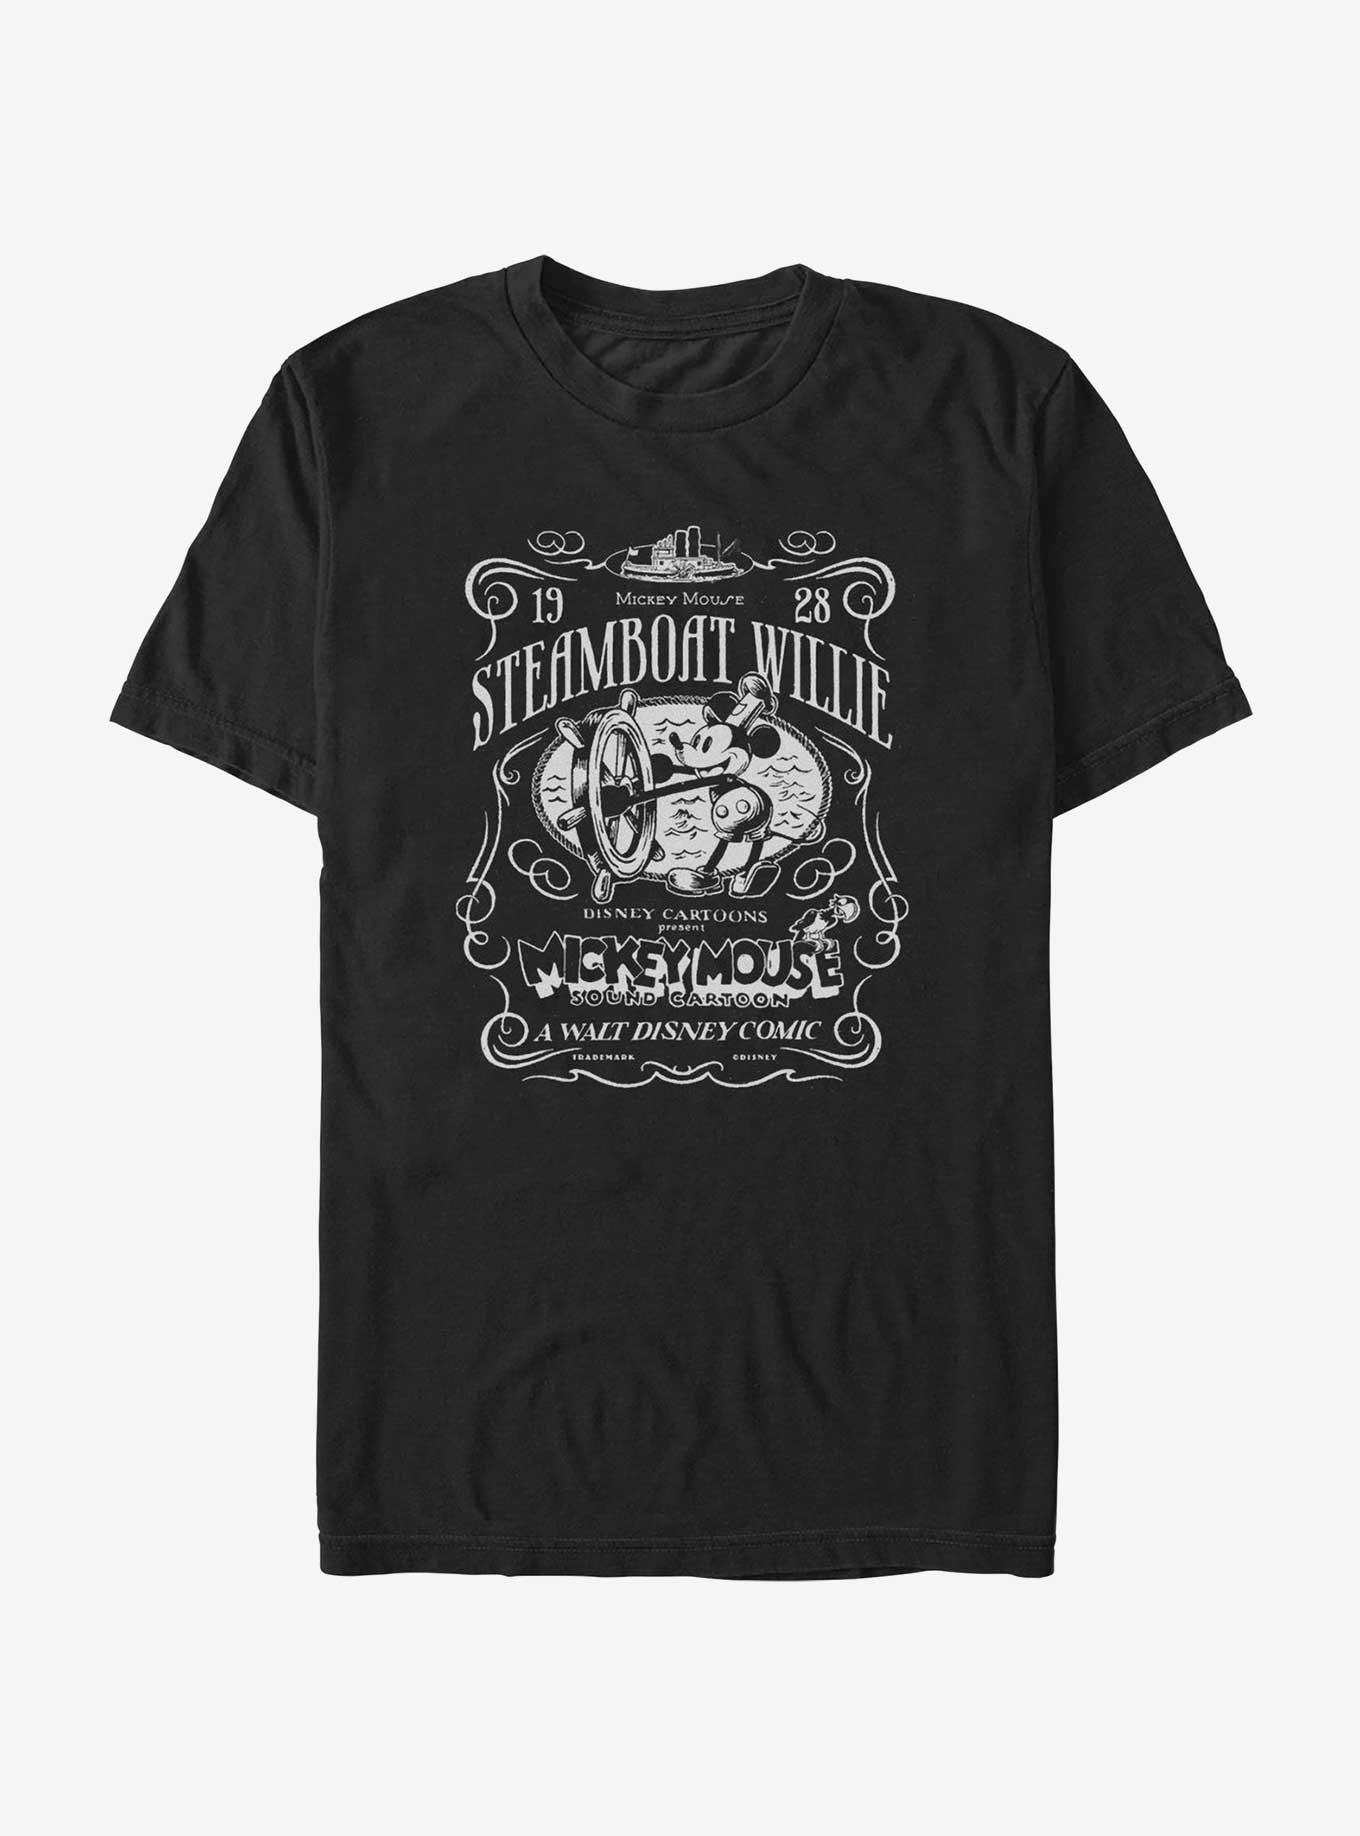 Disney100 Steamboat Willie Extra Soft T-Shirt